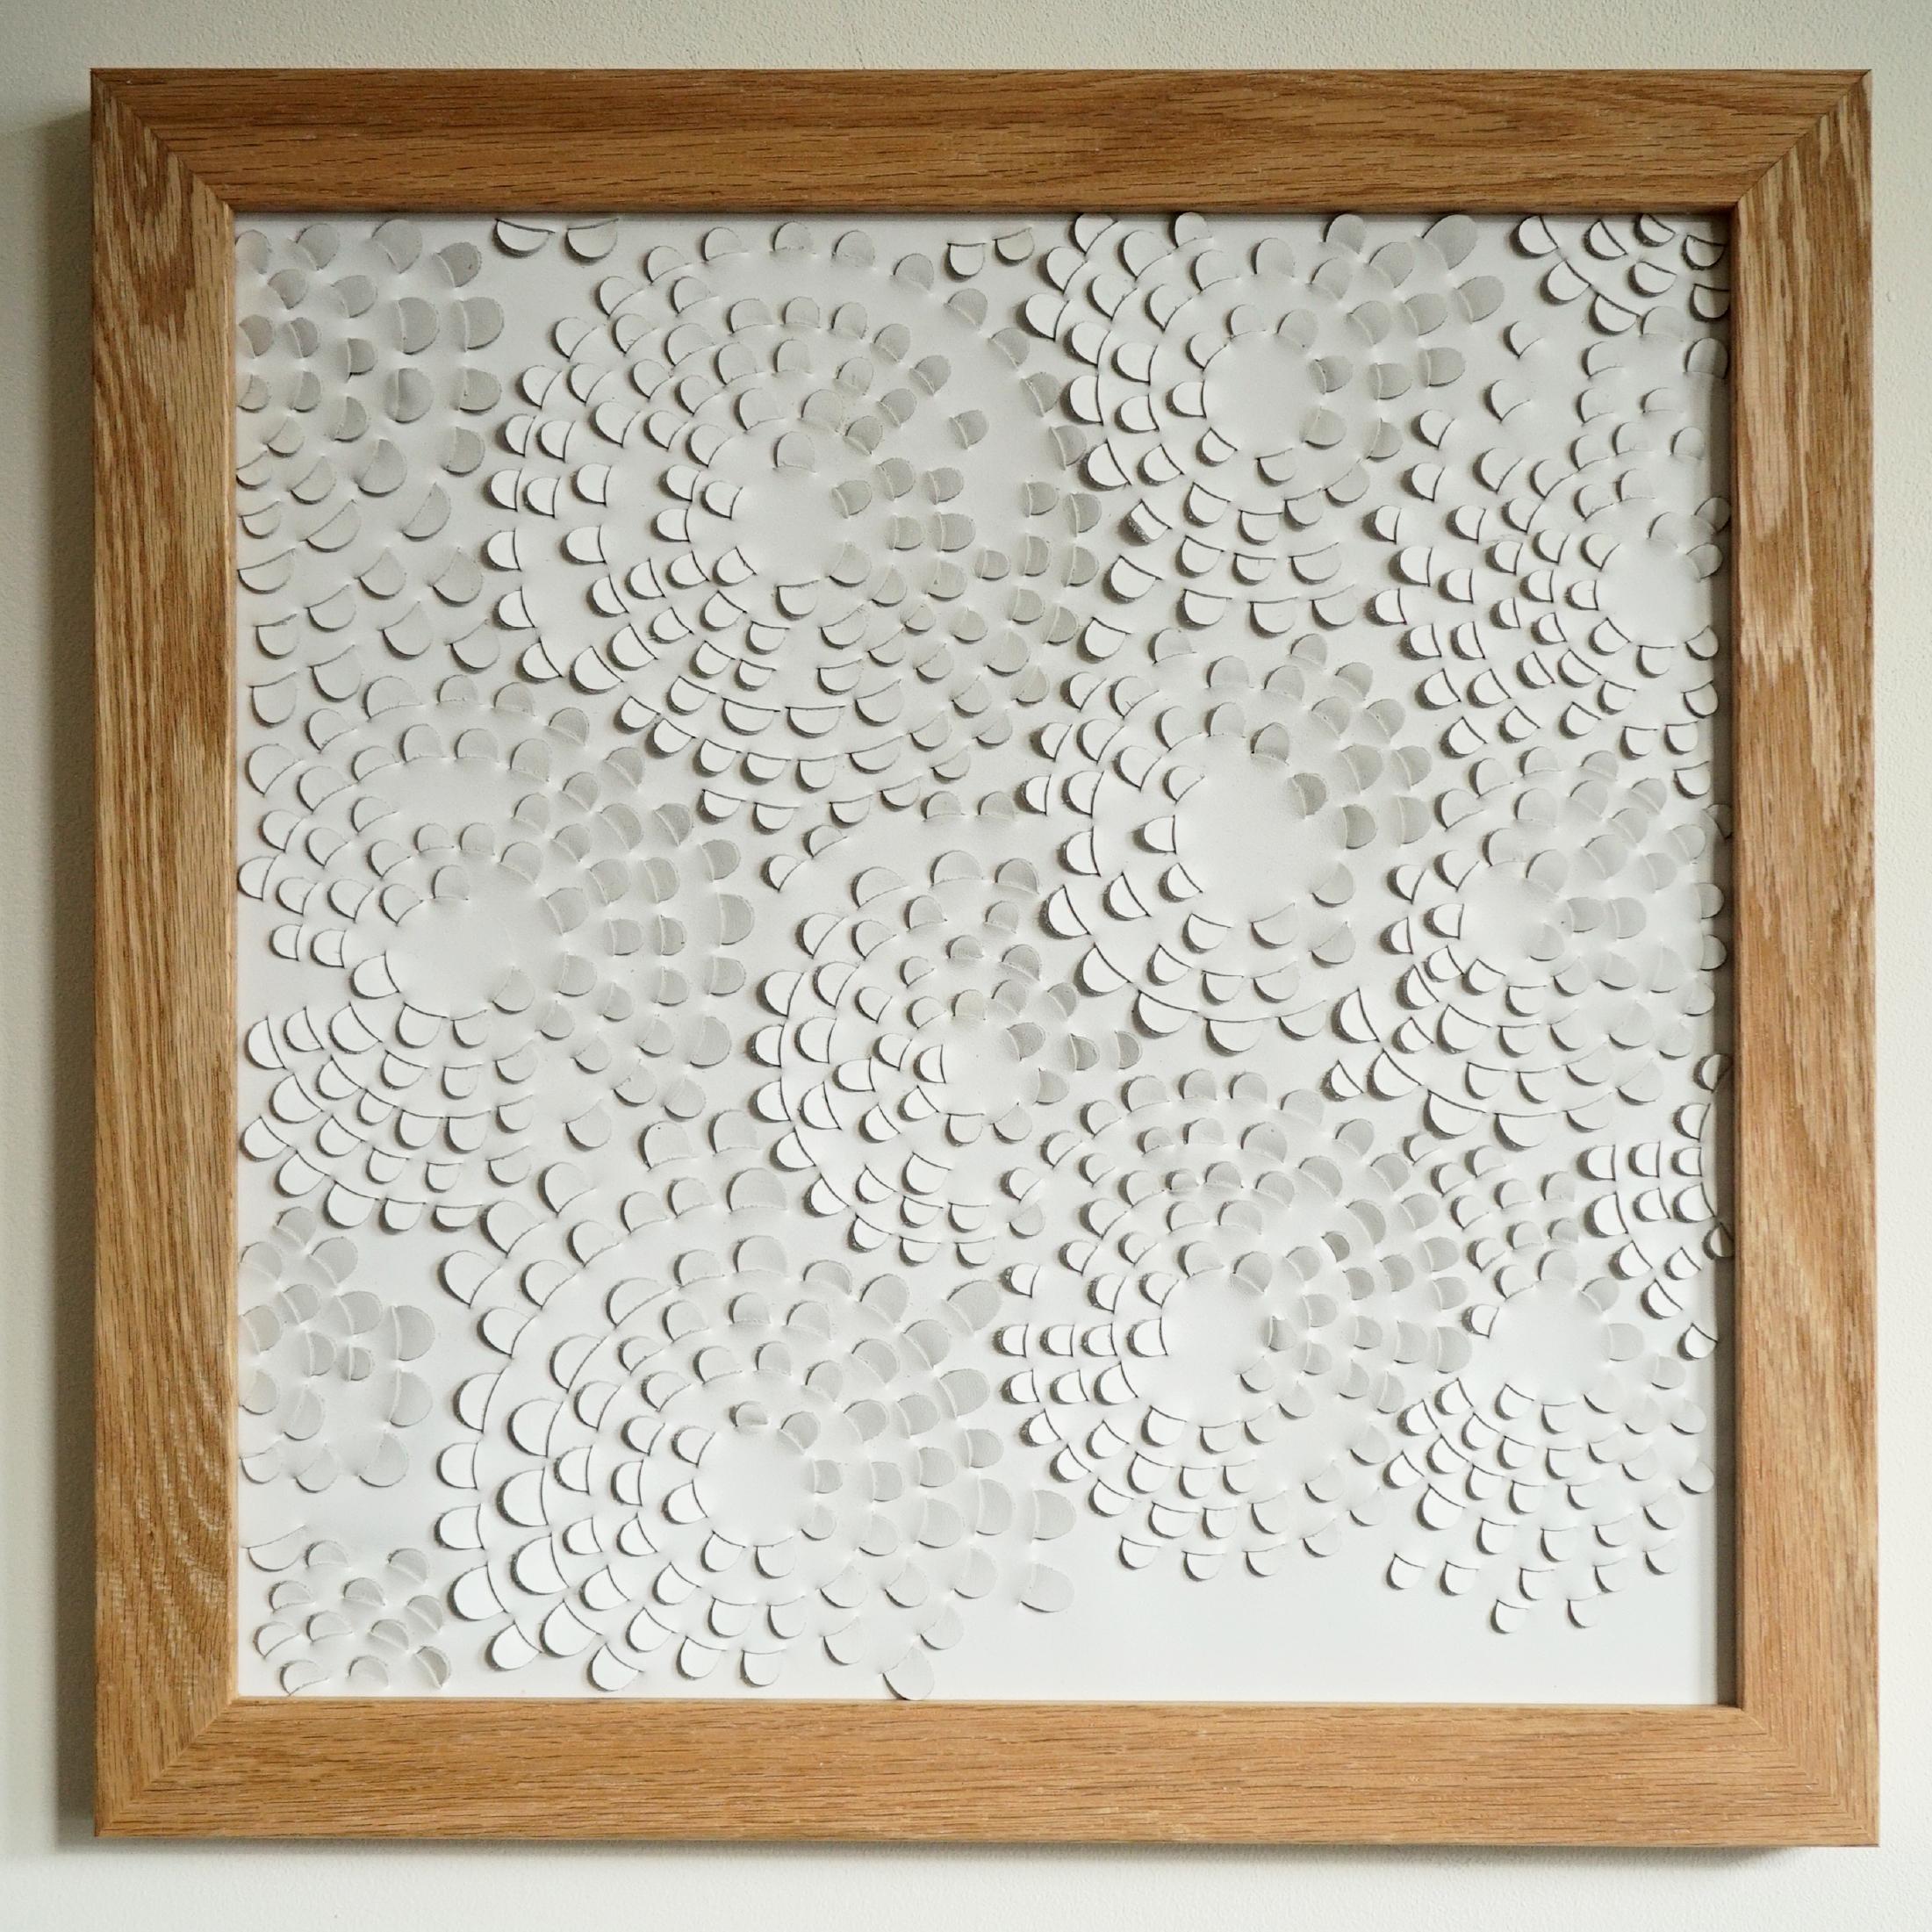 Dahlia:

A piece of 3D sculptural wall art designed and made from two layers of white leather woven together by Louise Heighes.
Measurements are 17 x 17 inches or 43 x 43 cm

Inspired by the mass of small ringed petals that make up the head of the